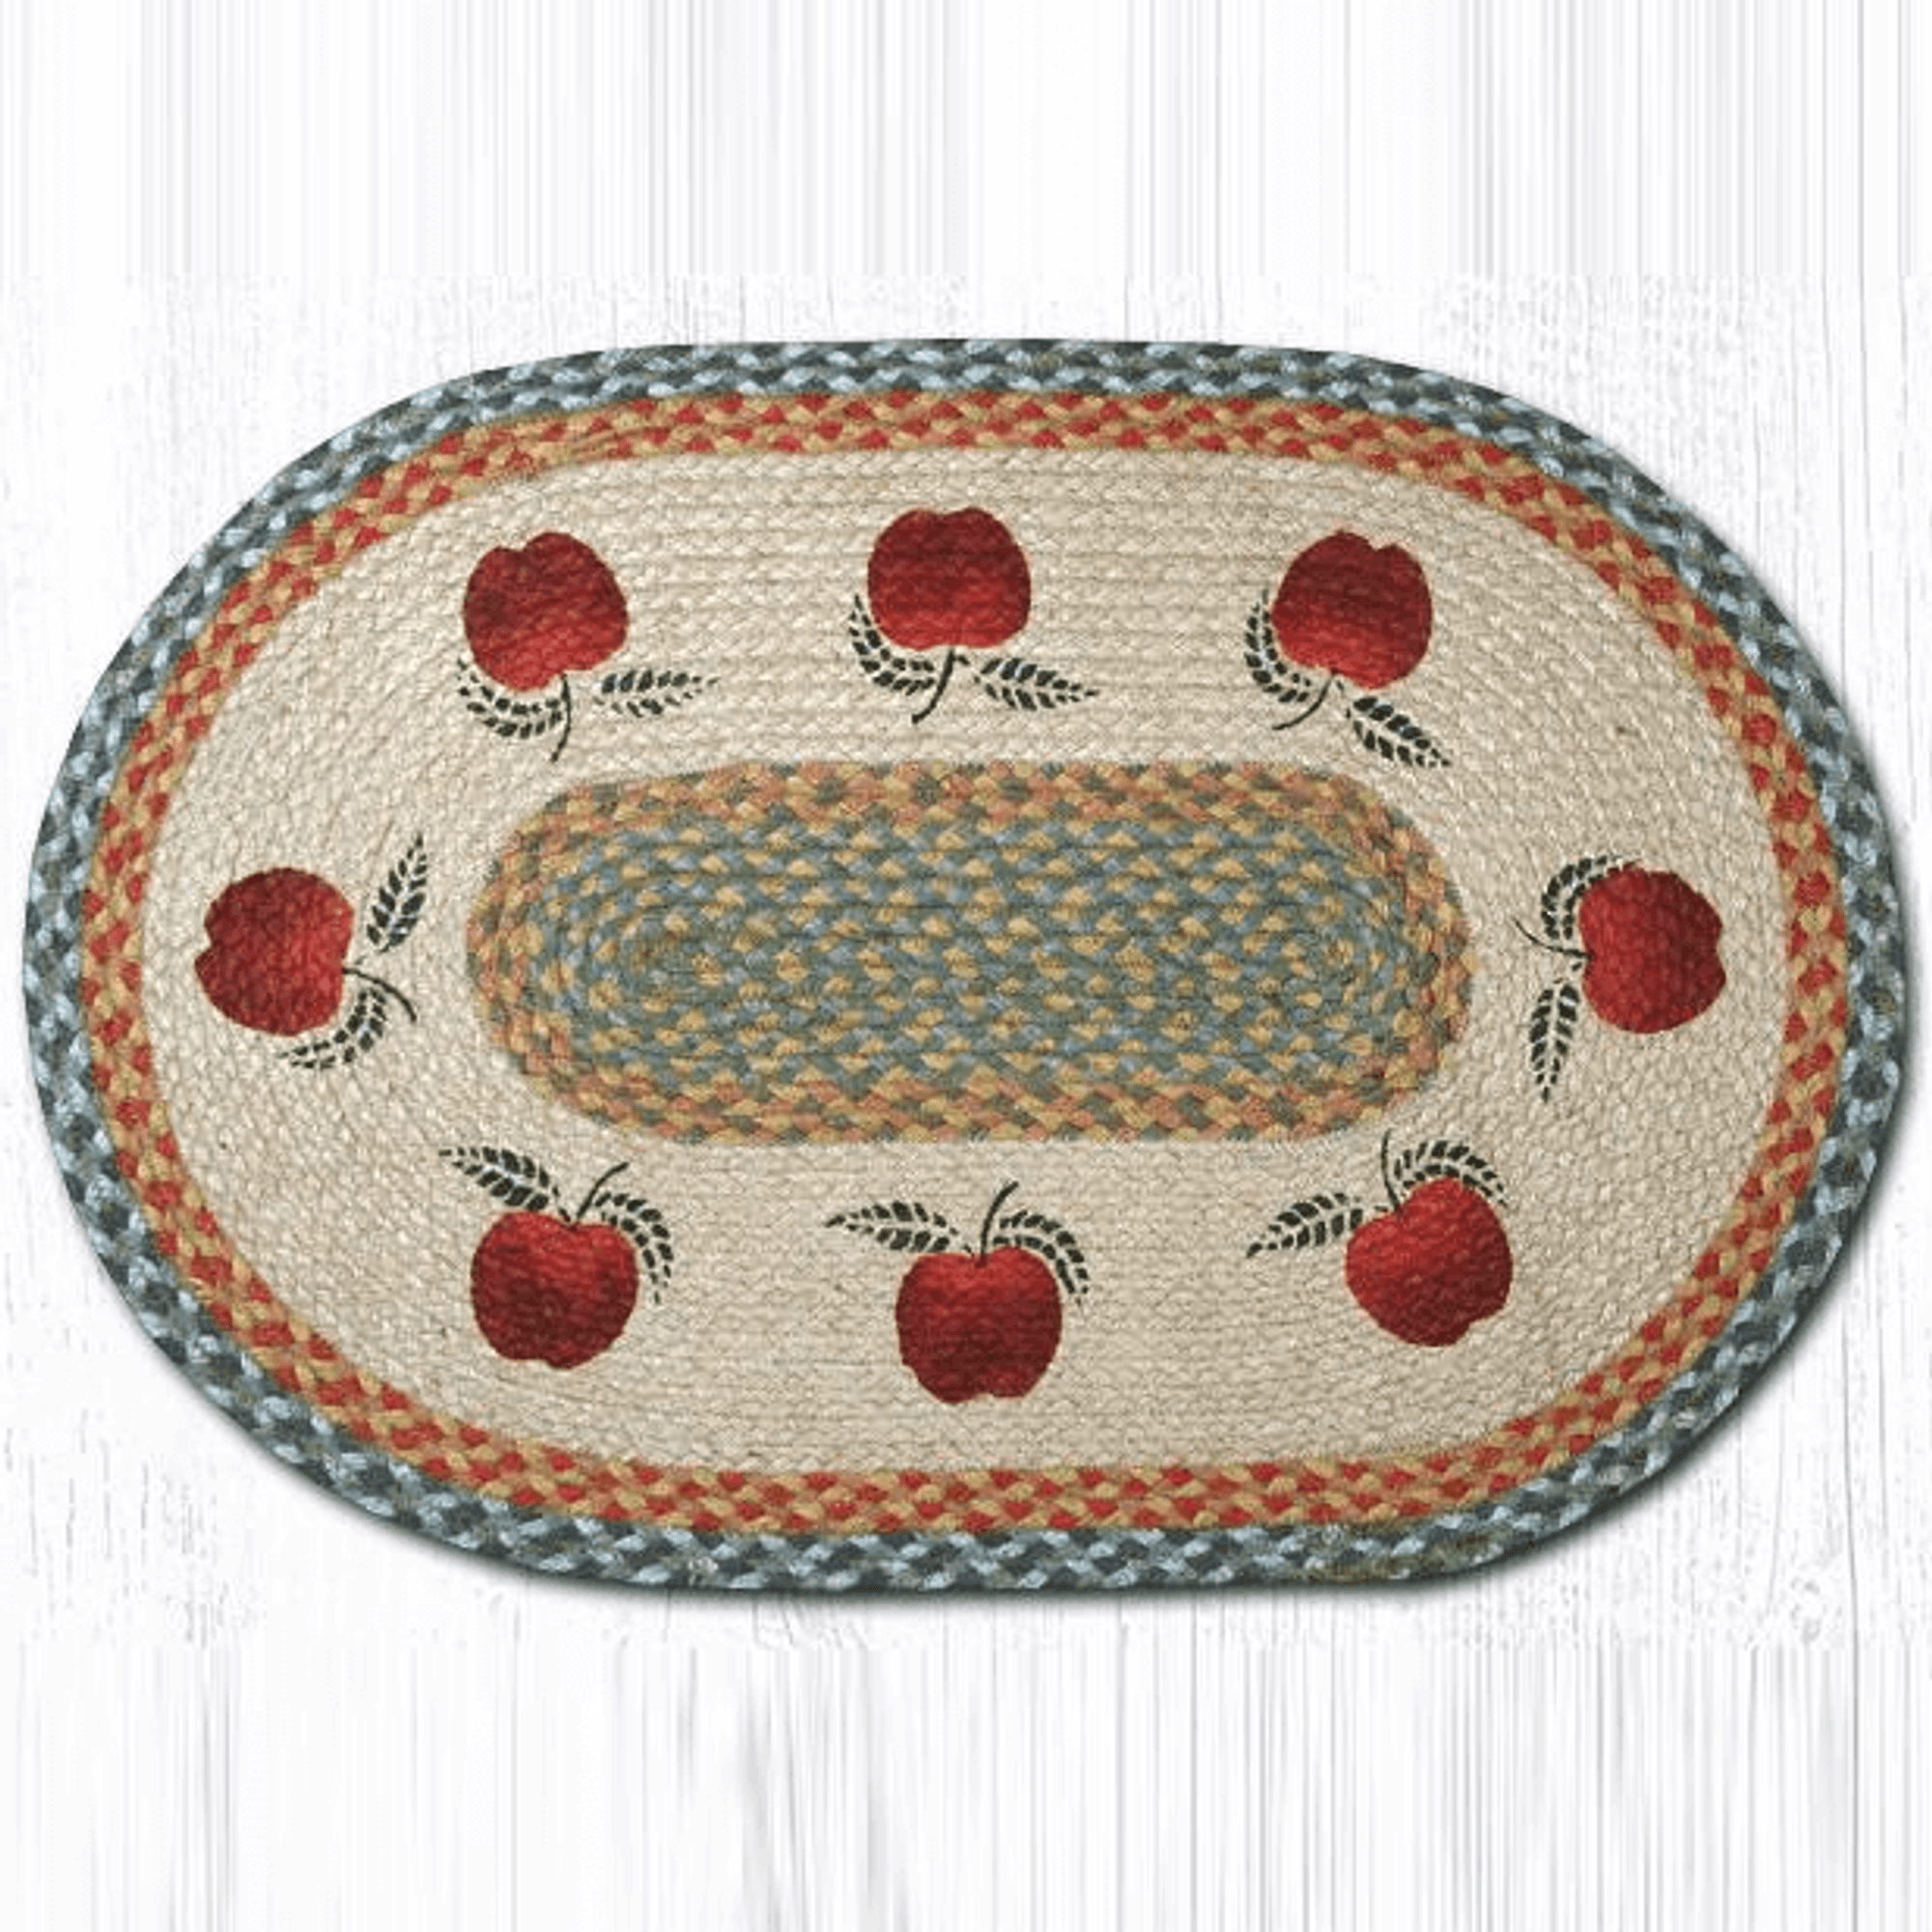 Apples Oval Patch Braided Rug, Capitol Earth Rugs